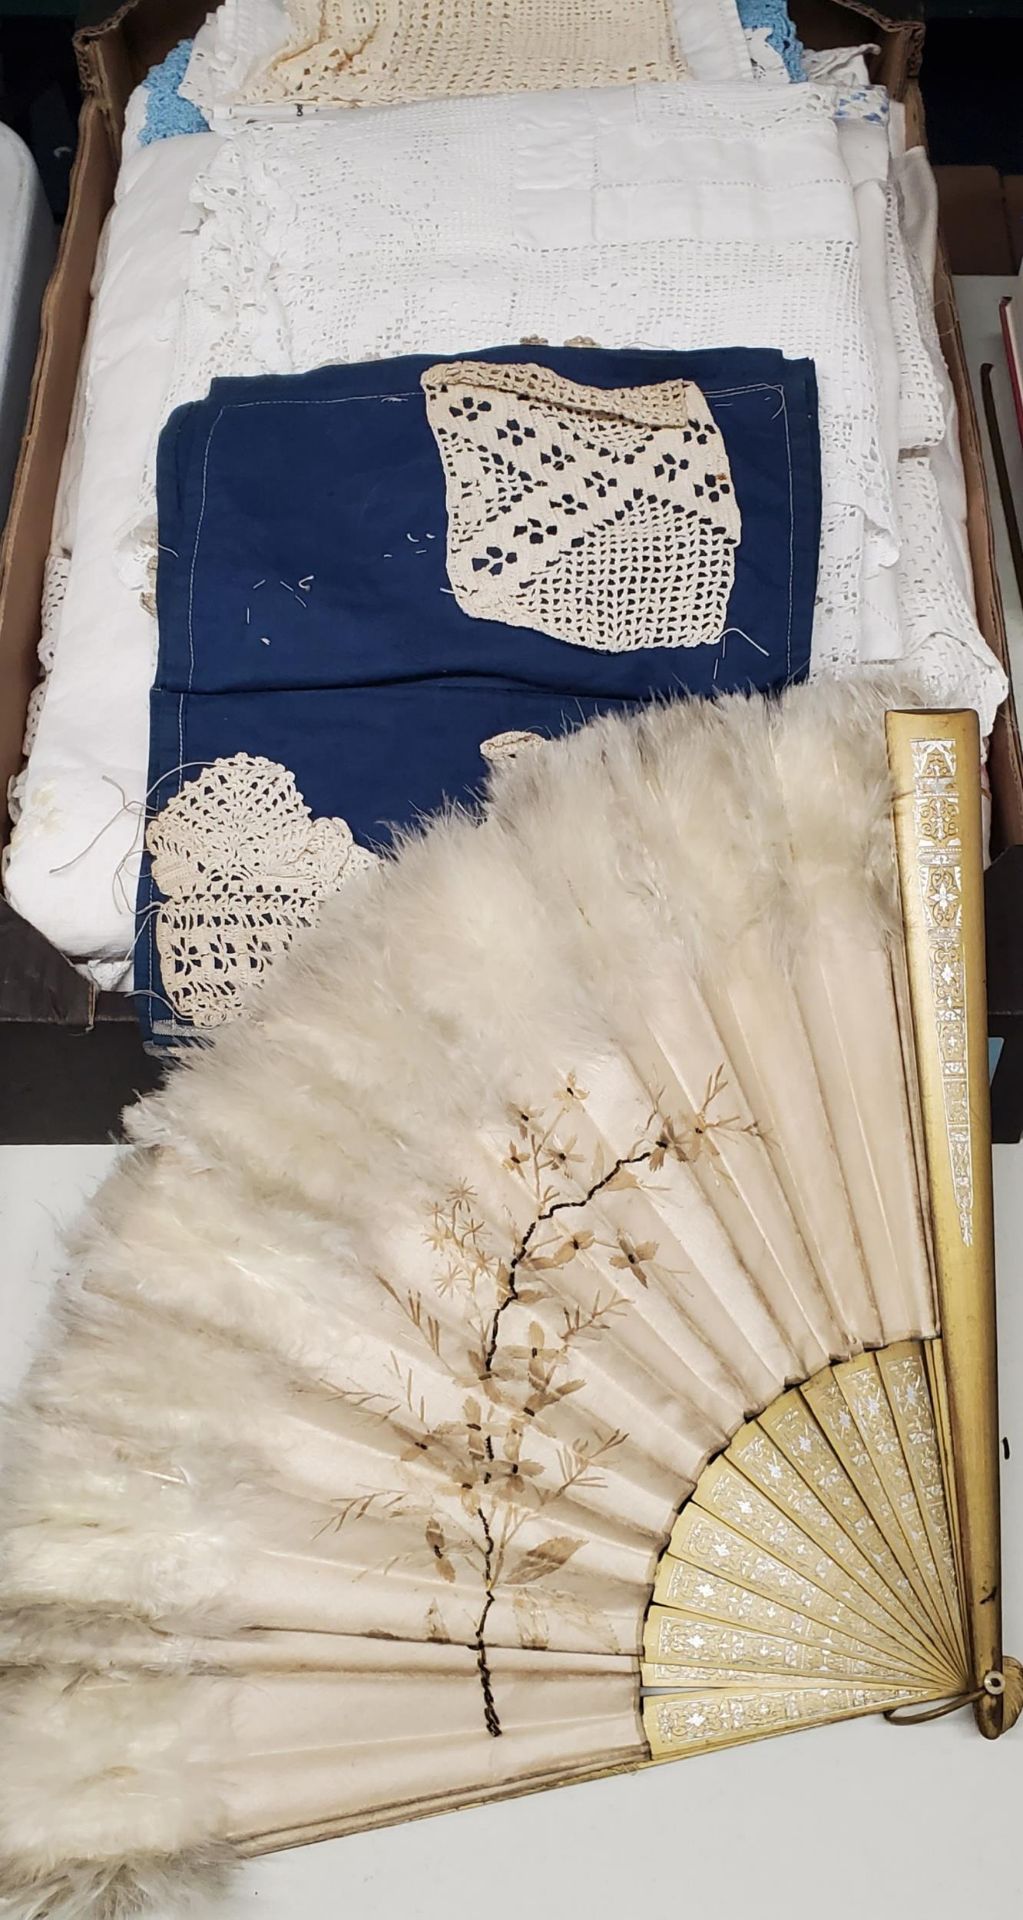 A BOX OF VINTAGE SILK AND AN ORNATE FEATHERED FAN